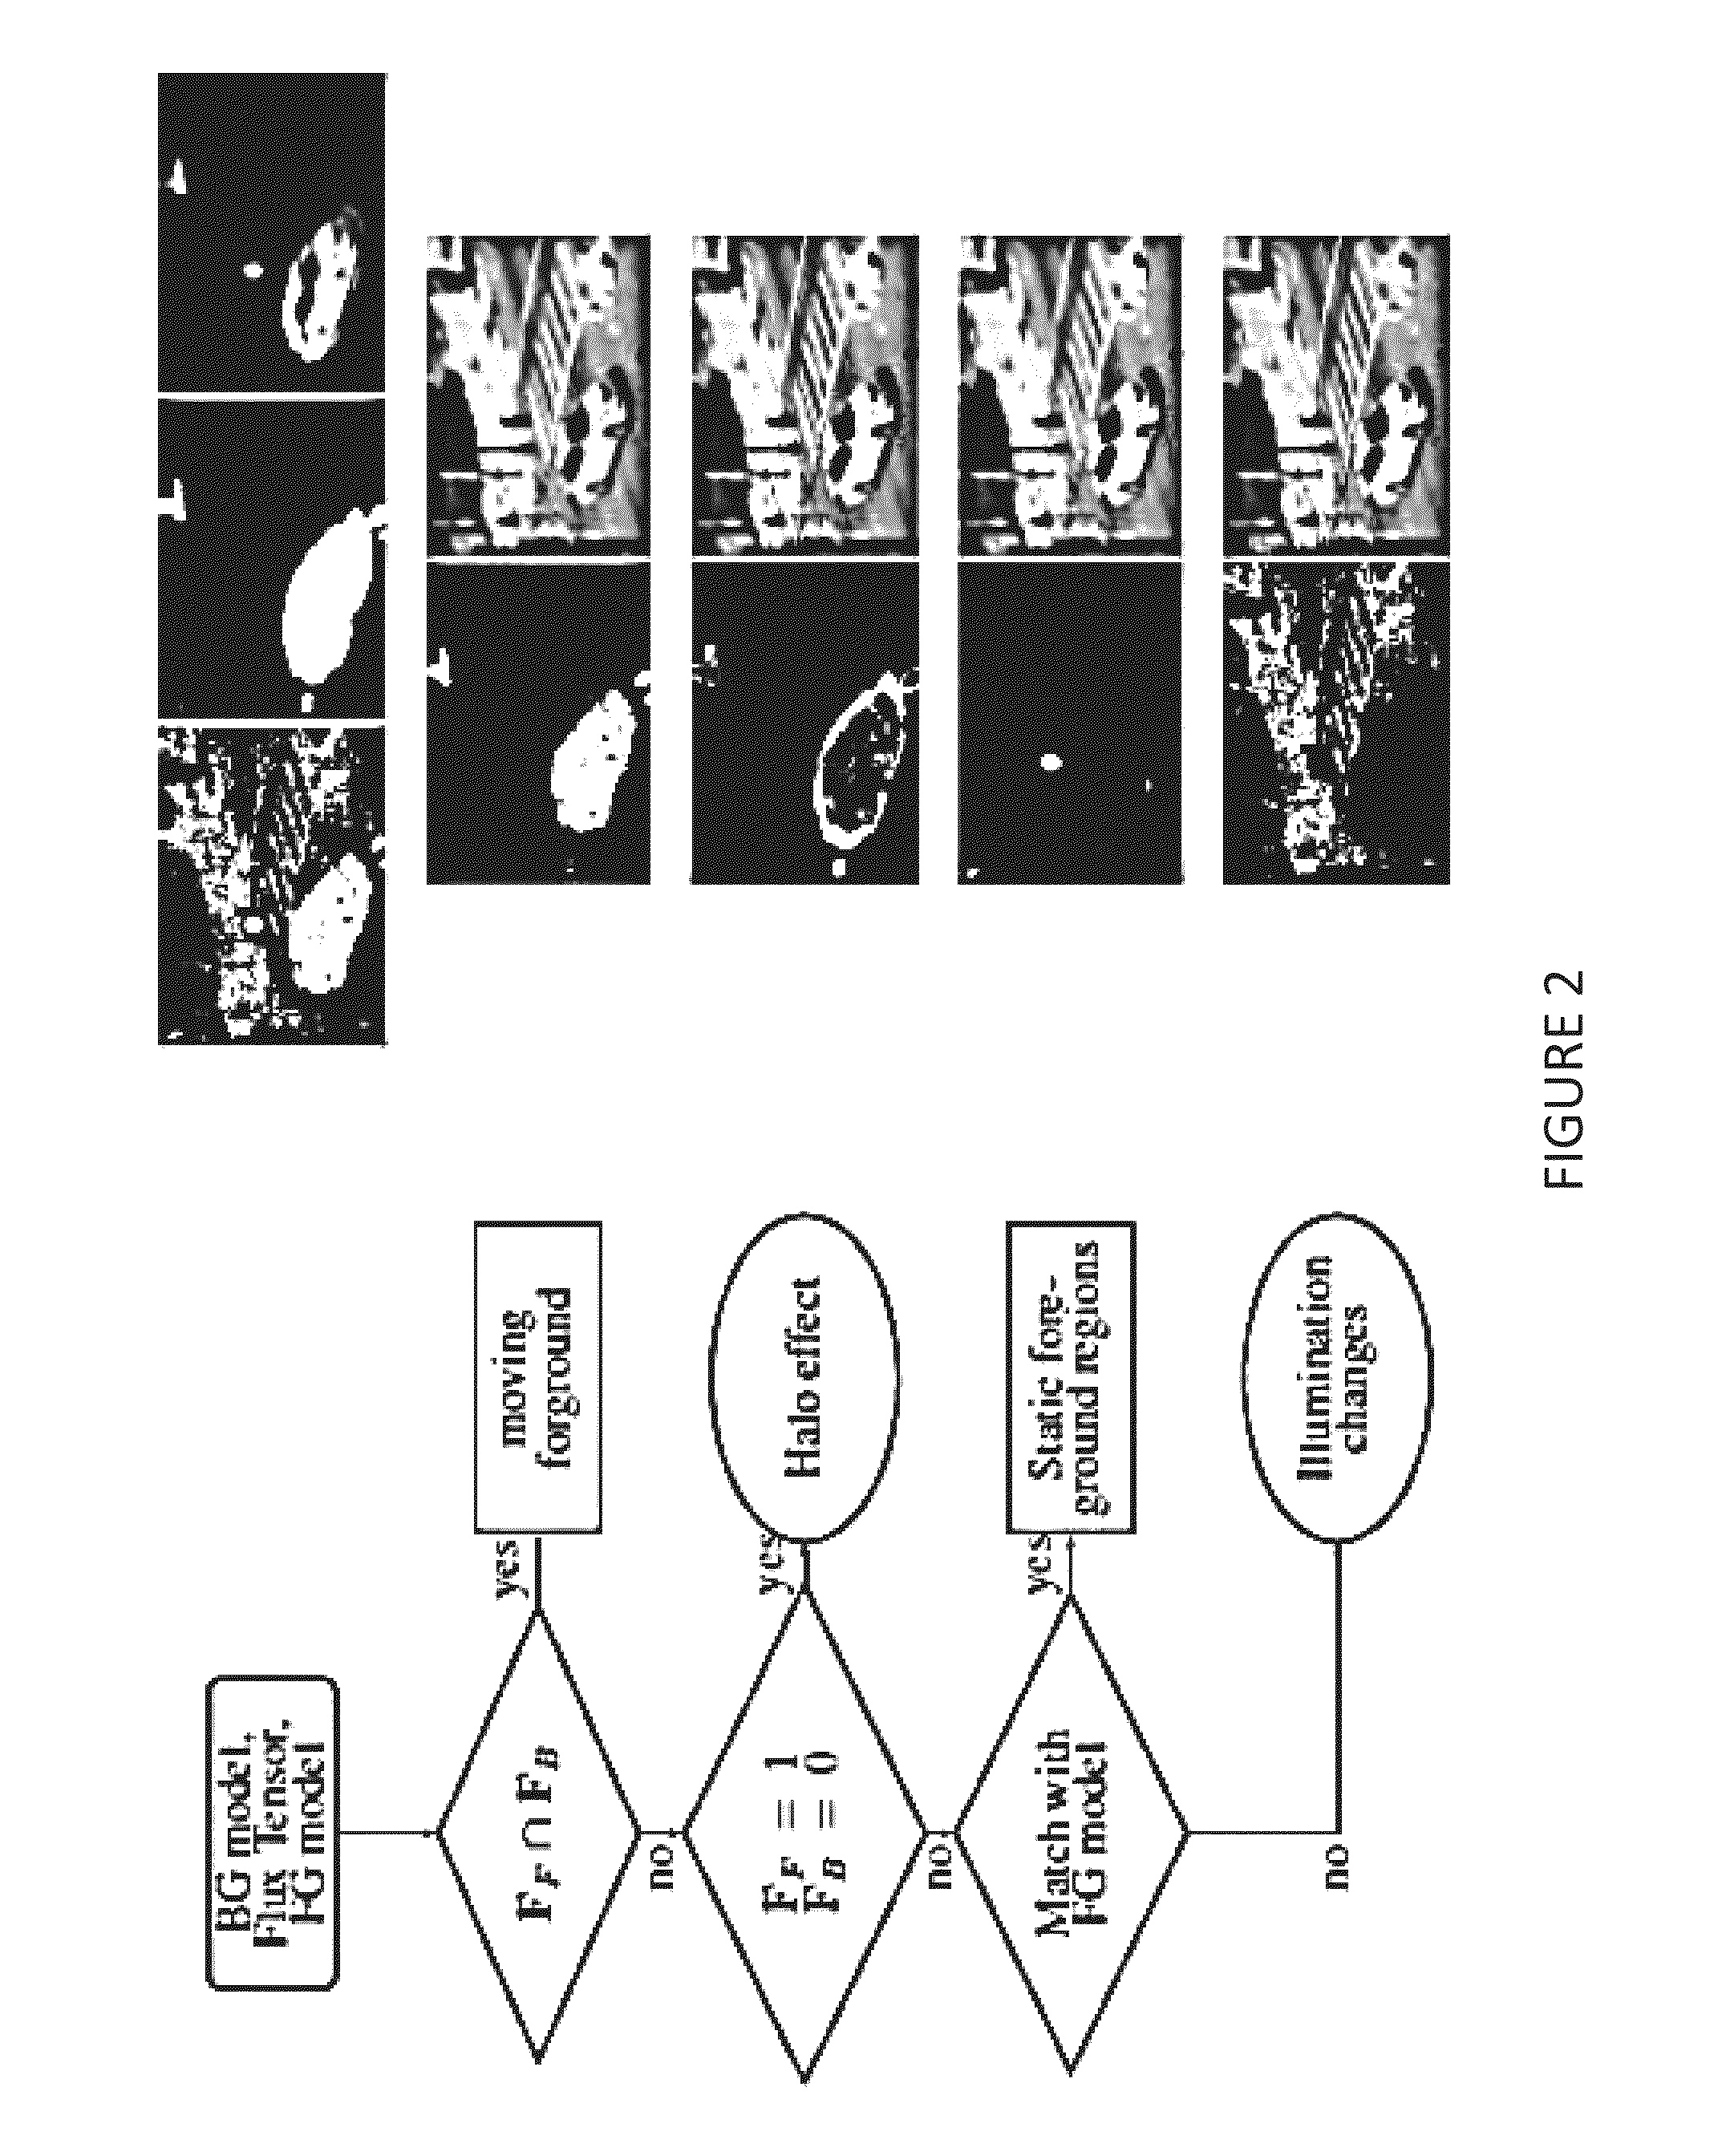 System and method for static and moving object detection